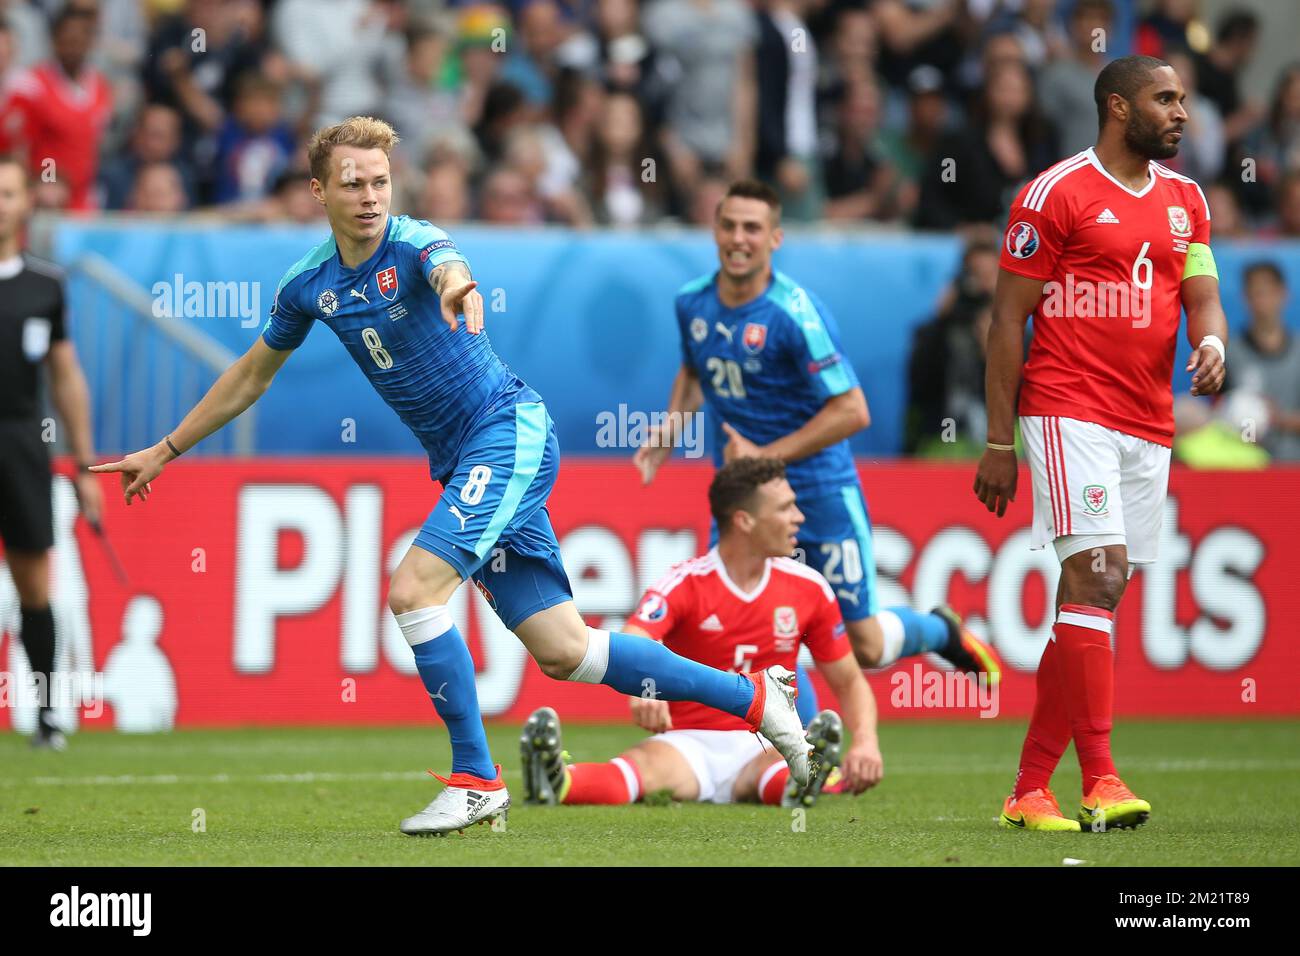 Slovakian Ondrej Duda celebrates after scoring during a soccer game between Wales and Slovakia, in group B of the group stage of the UEFA Euro 2016 European Championships, Saturday 11 June 2016 in Bordeaux, France. BELGA PHOTO BRUNO FAHY Stock Photo